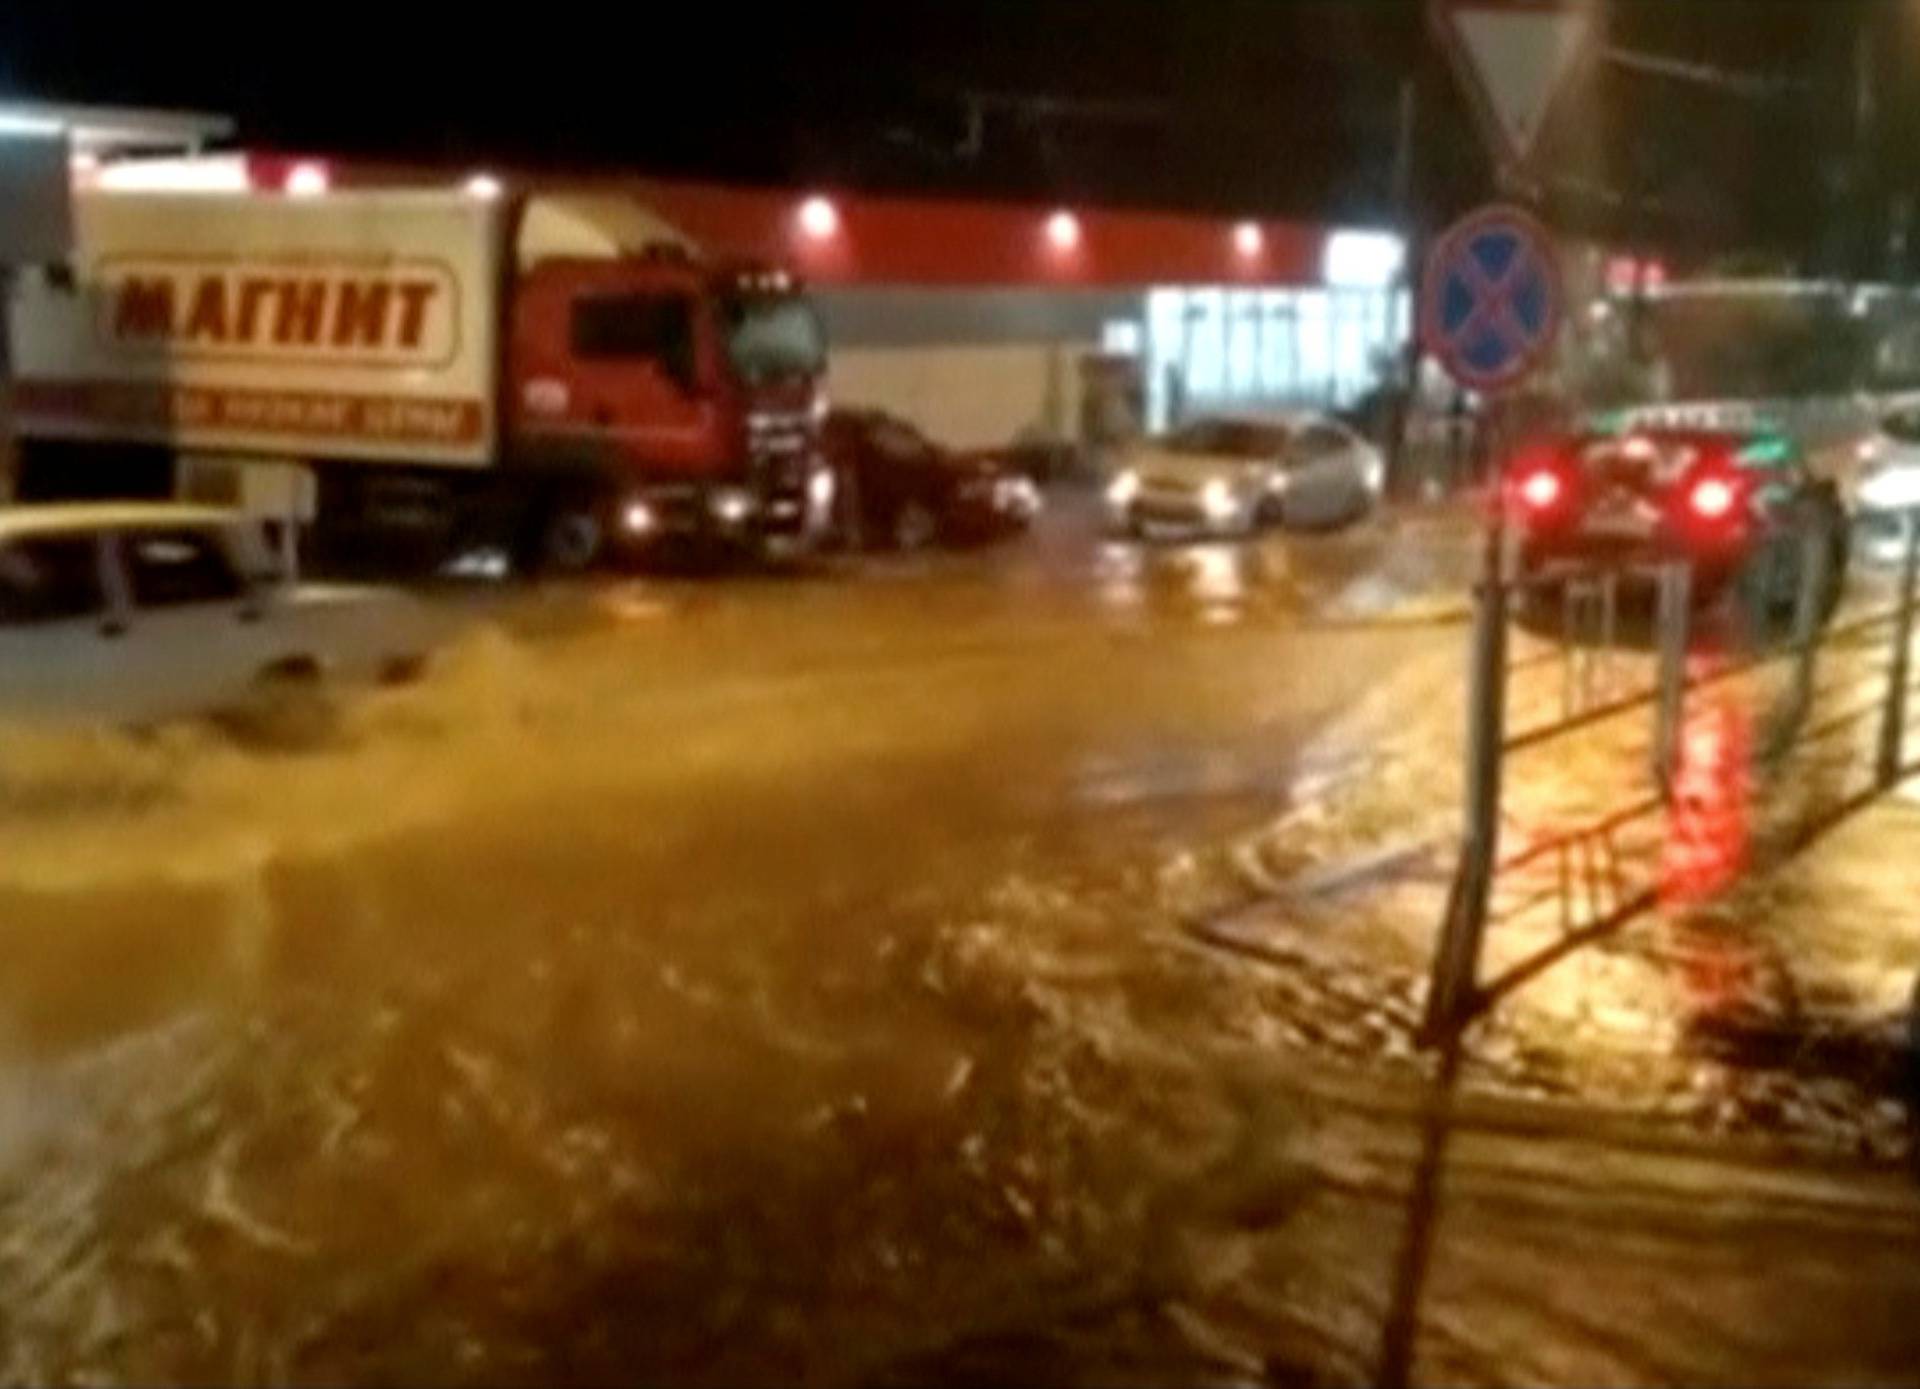 A still image shows vehicles driving along a street in a settlement affected by floodwaters in Krasnodar Region